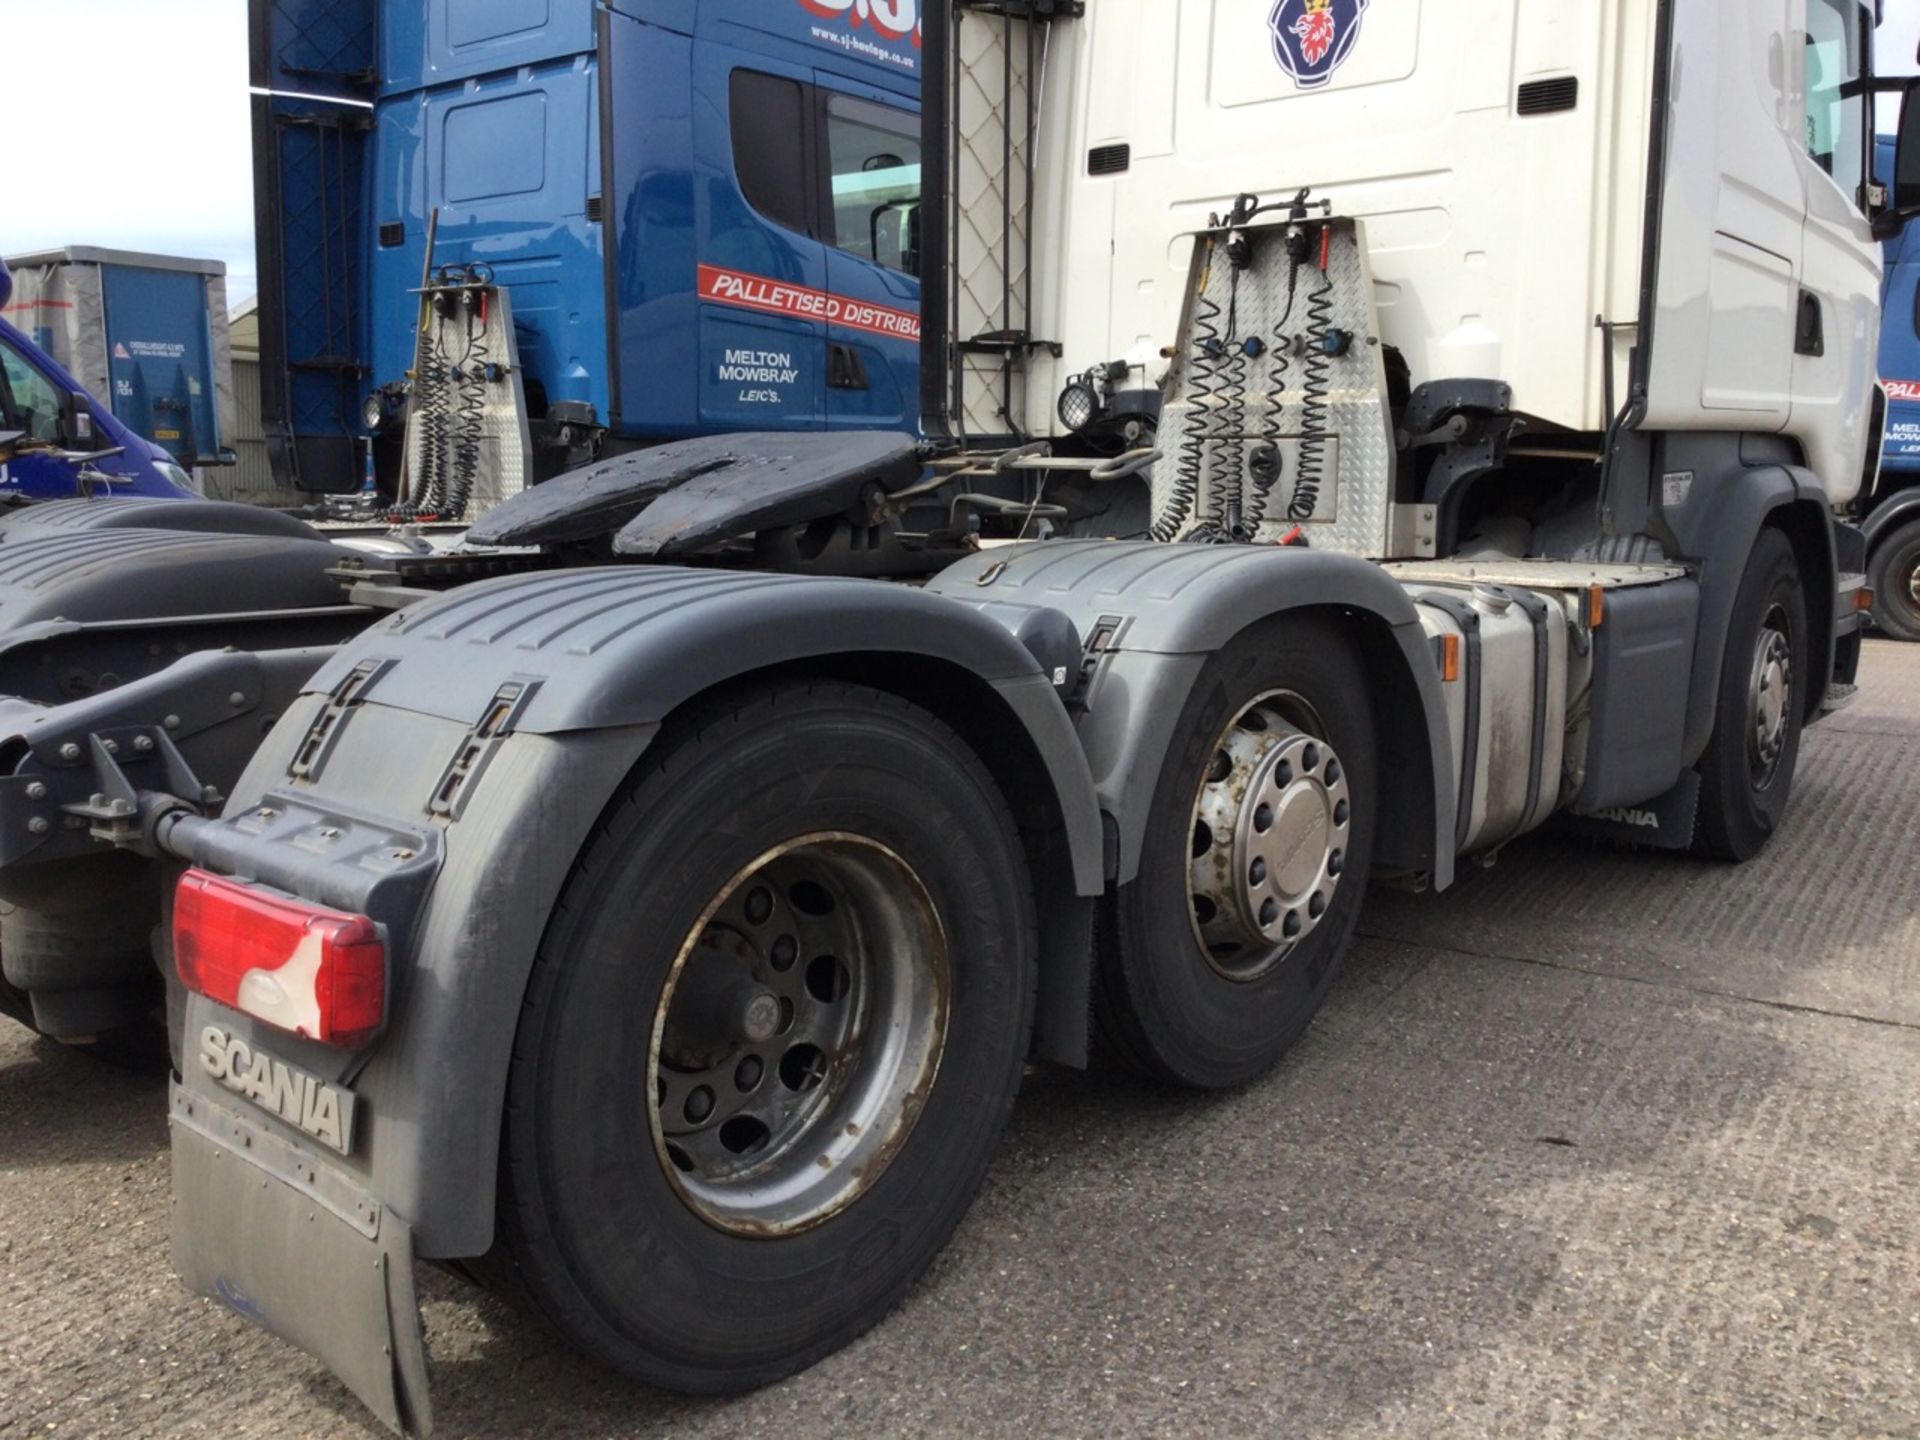 SCANIA R450 6x2 Topline Tractor Unit, with mid-lift axle, sleeper Until 30/04/24 Registration numbe - Image 3 of 4